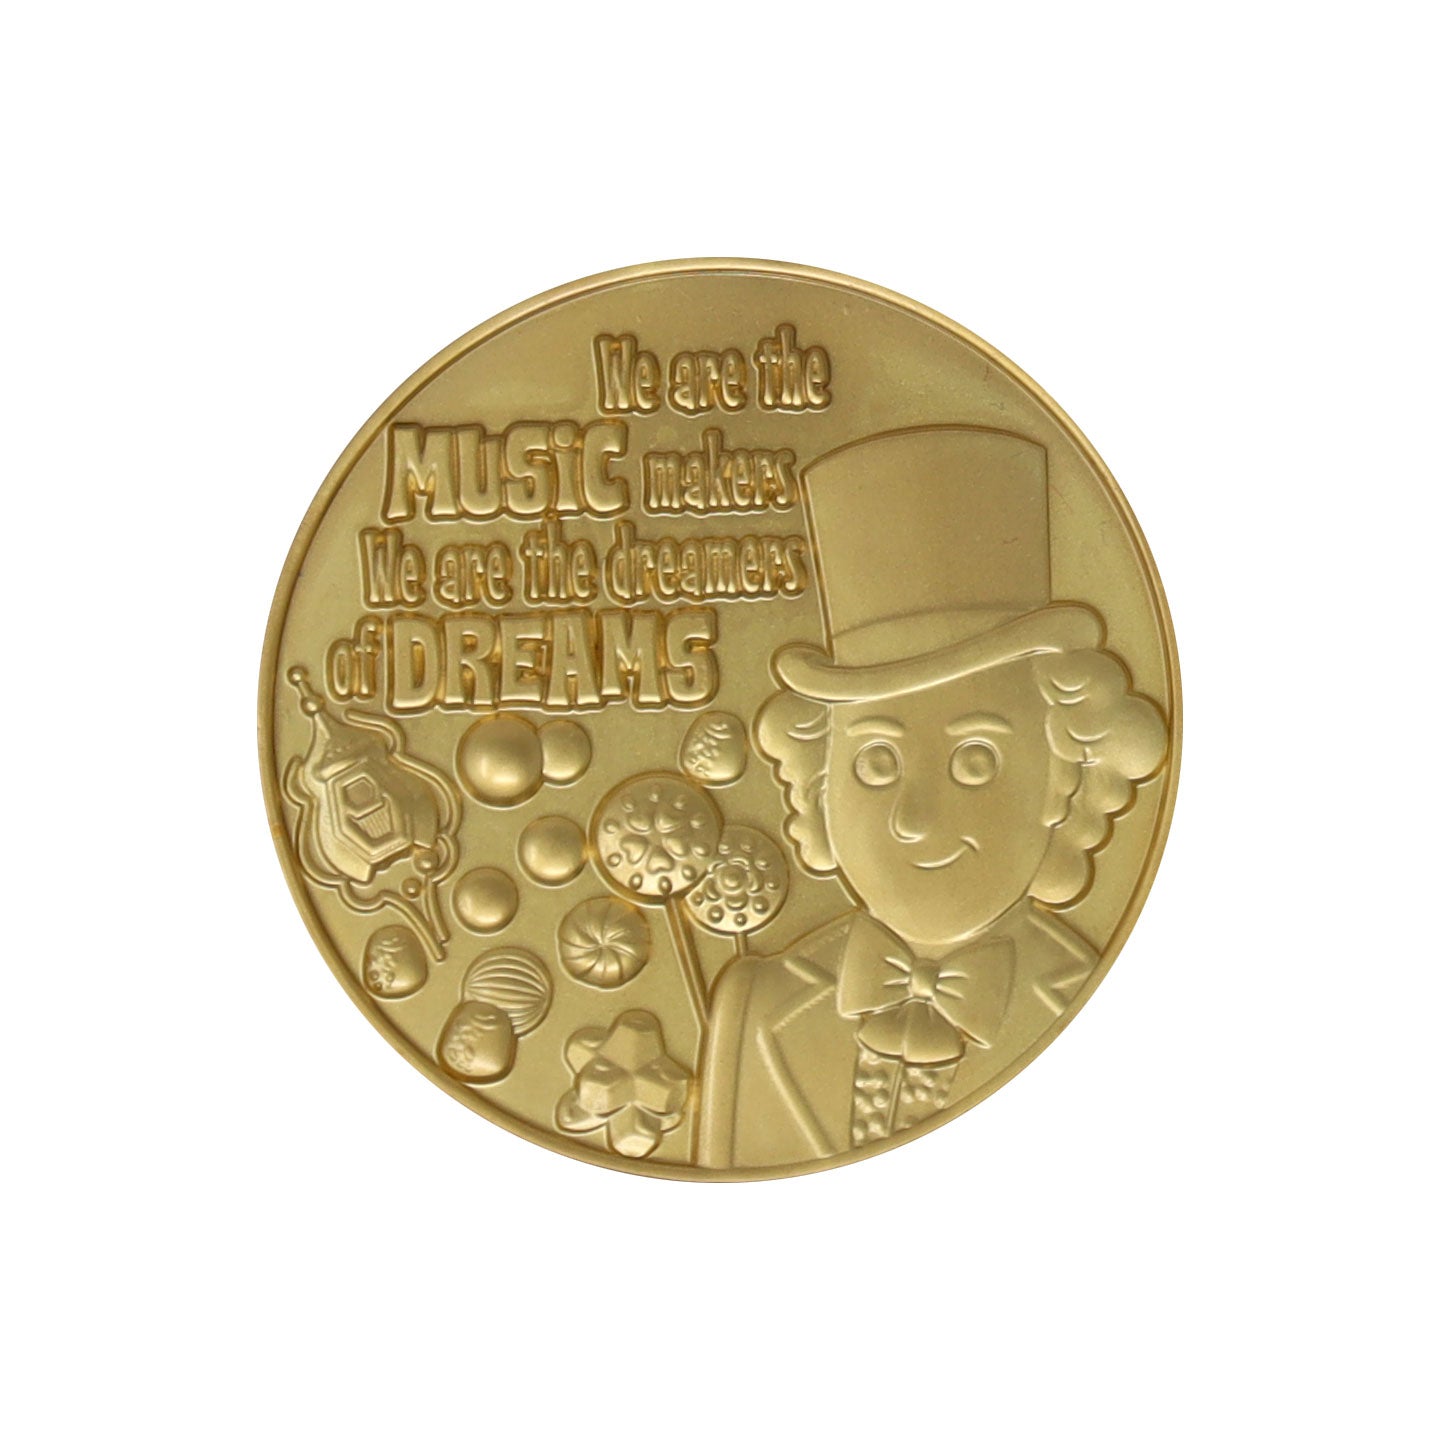 Willy Wonka and the Chocolate Factory Limited Edition Collectible Coin